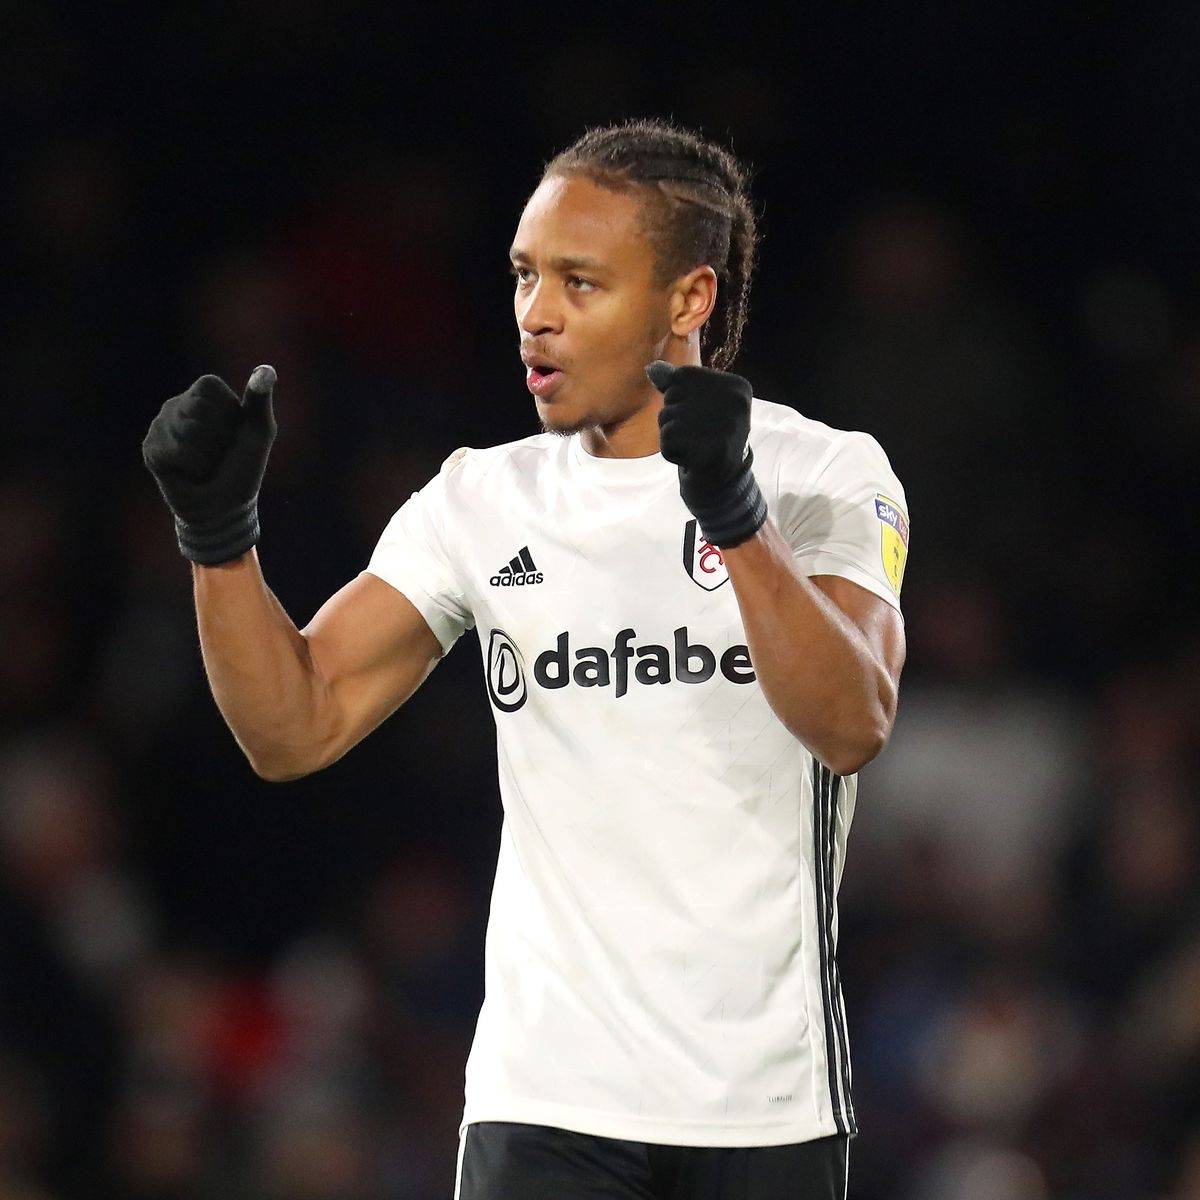 Jamaican Bobby Reid scores in 2-2 draw for Fulham against West Brom in the EPL